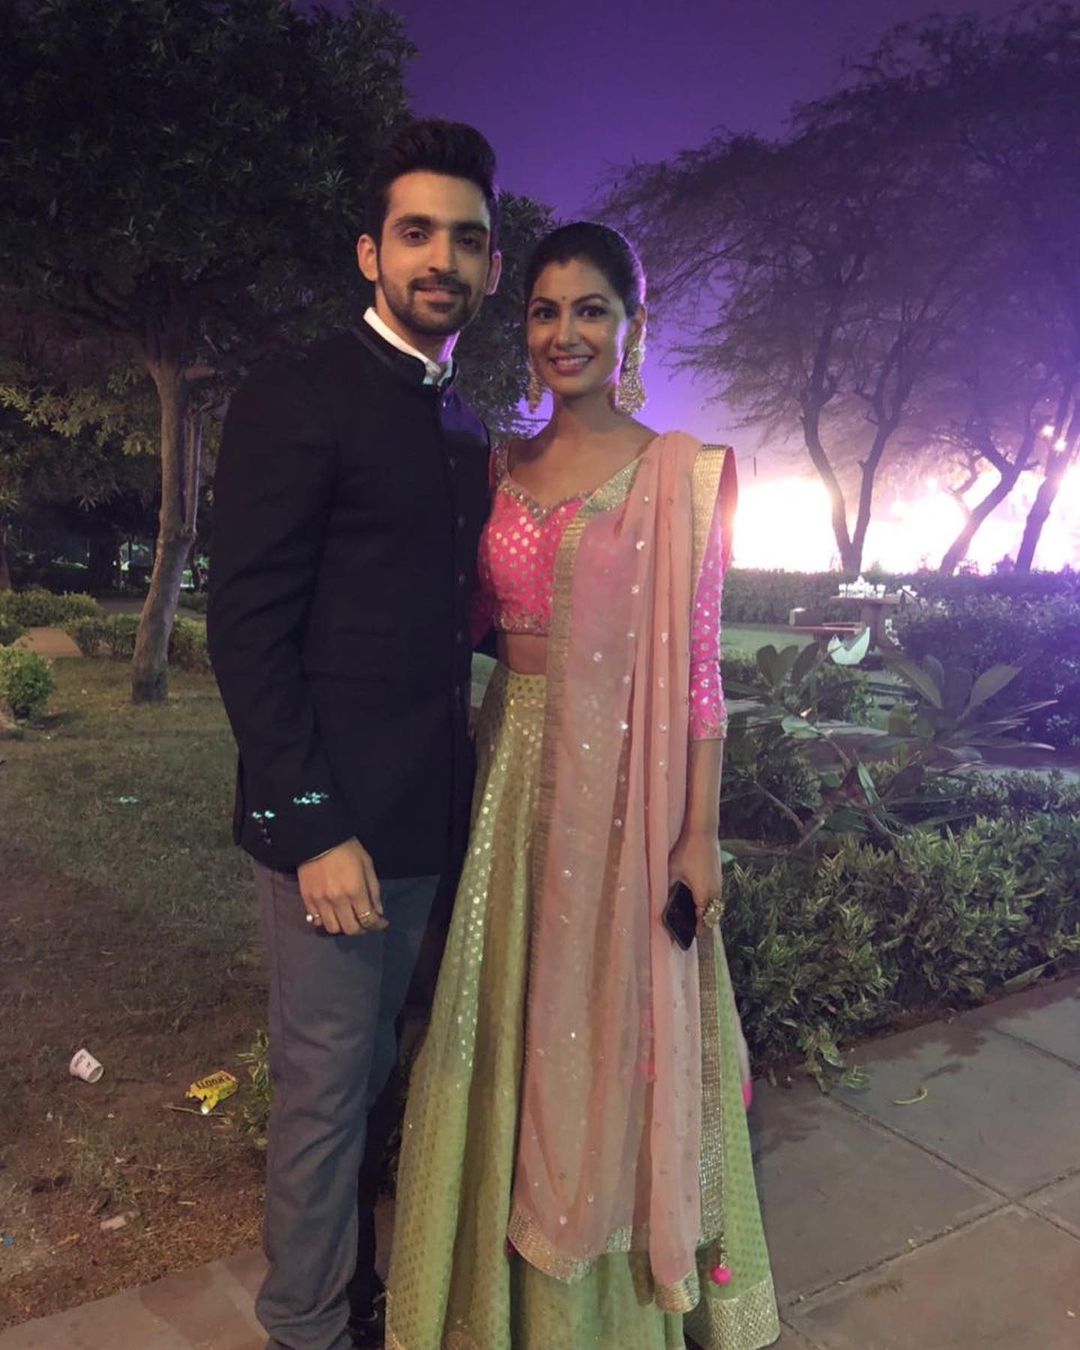 Kaise Mujhe Tum Mil Gaye’s Lead Actors Arjit Taneja And Sriti Jha Talked About Their Fear In Relationship